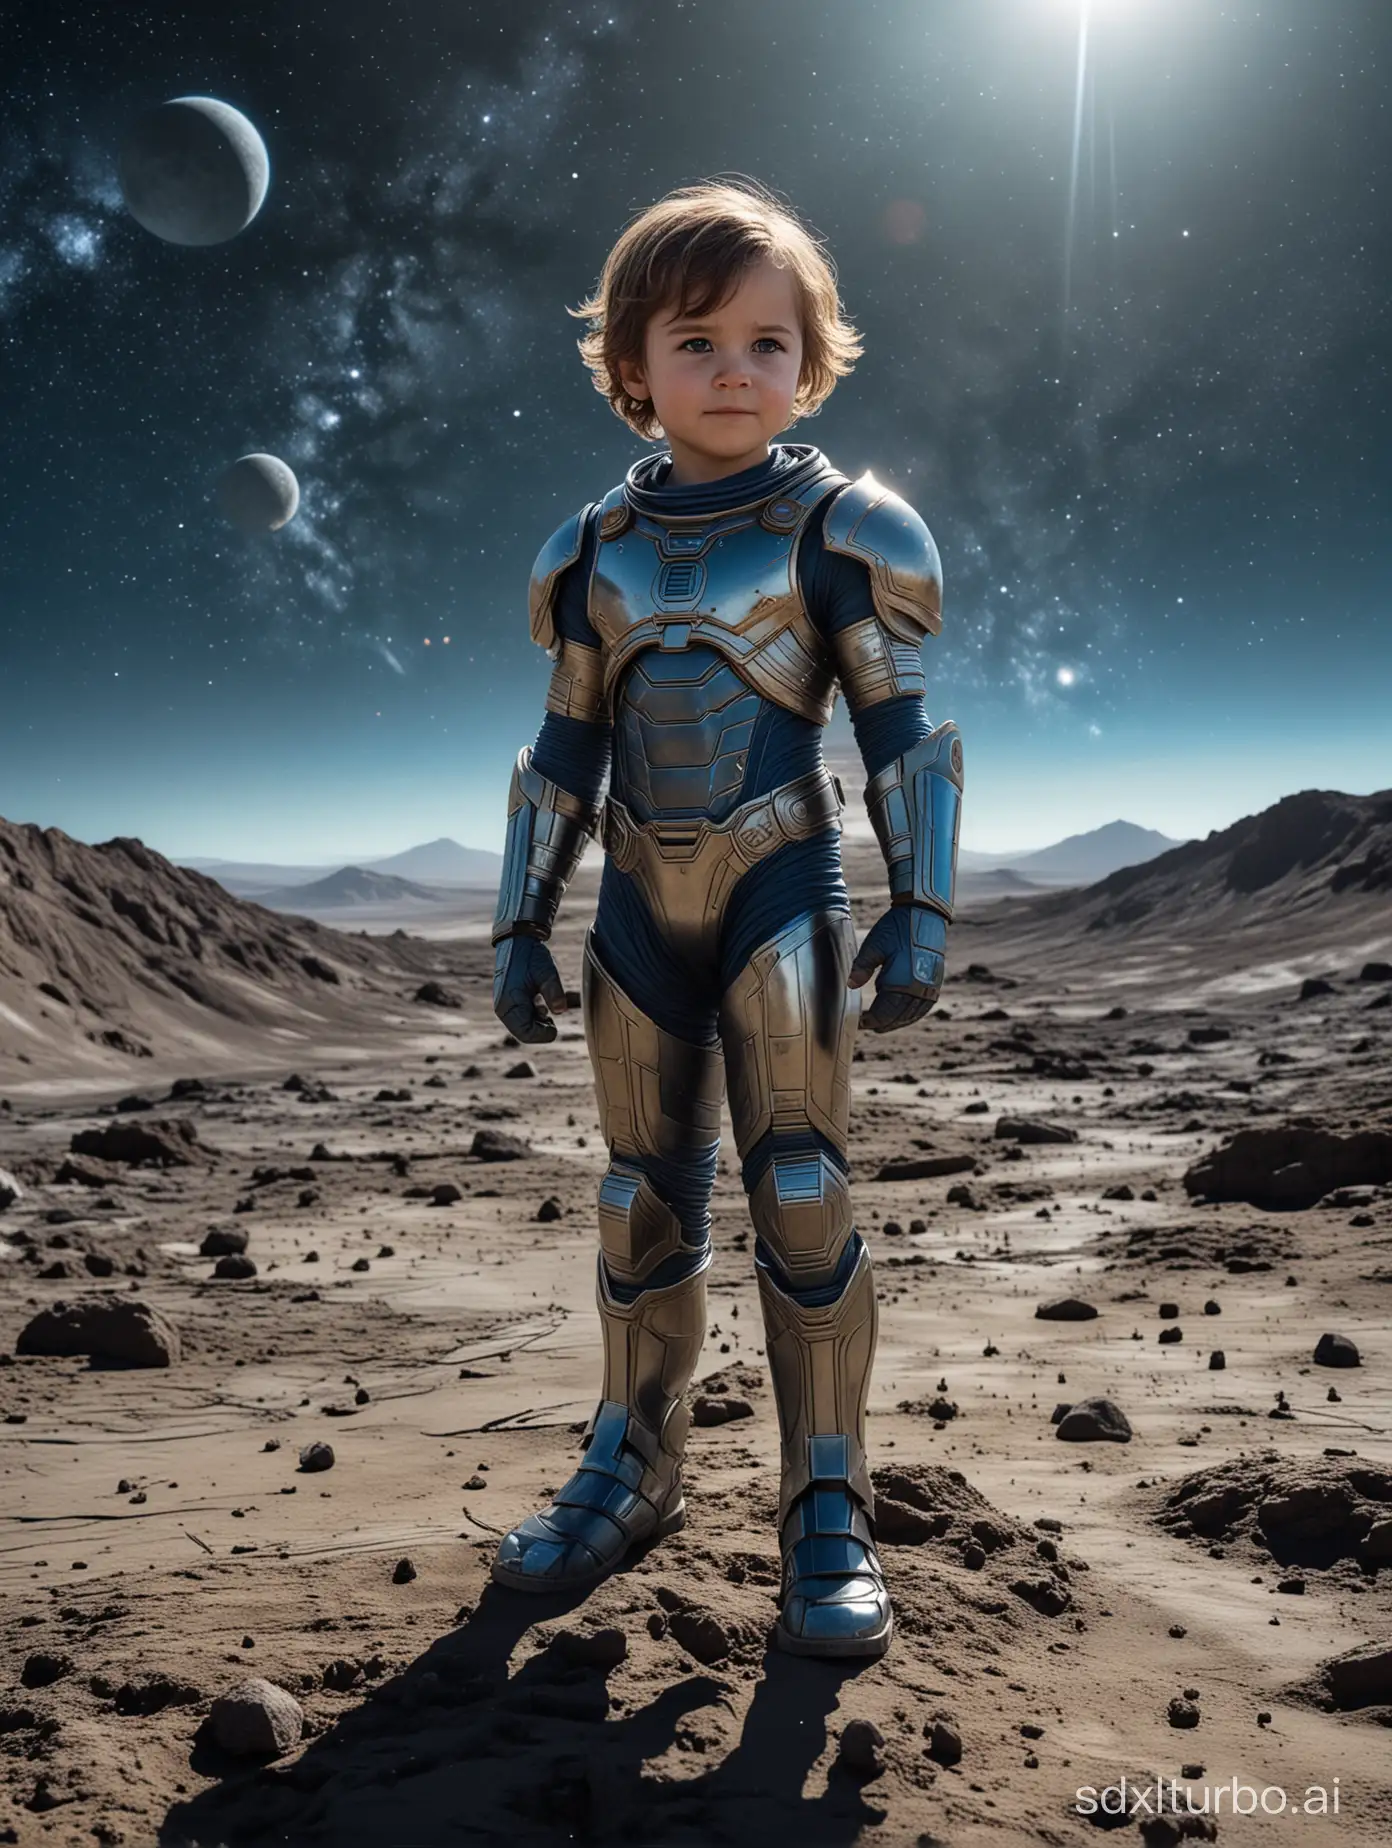 Child-Transforming-into-Marvel-Hero-on-Moon-with-Blue-Planet-Background